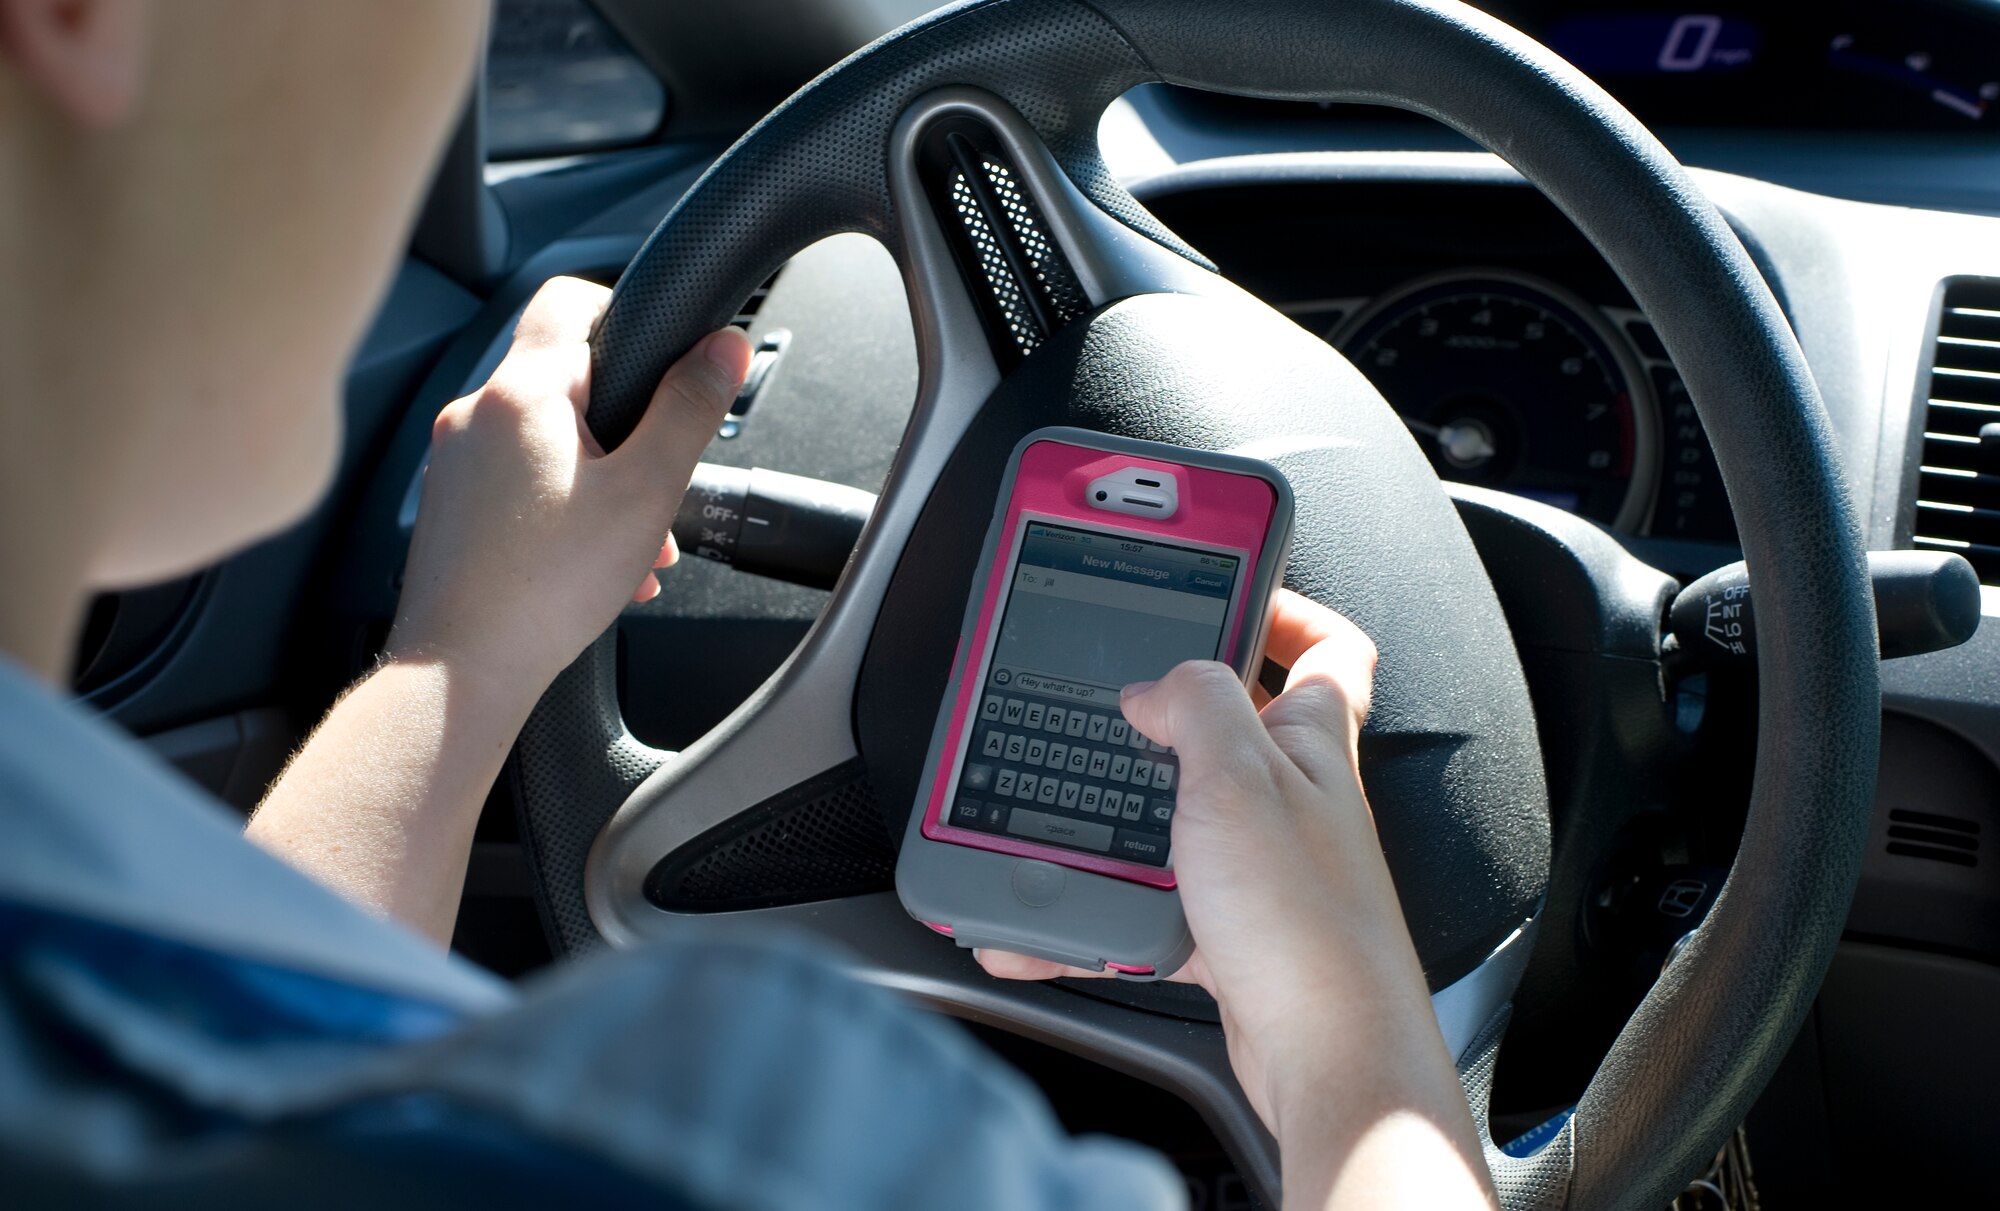 An Airman simulates texting and driving at Hurlburt Field, Fla., June 18, 2012. Cell phone usage while driving is prohibited on Department of Defense installations. (U.S. Air Force photo/Airman 1st Class Nigel Sandridge) (Released)
